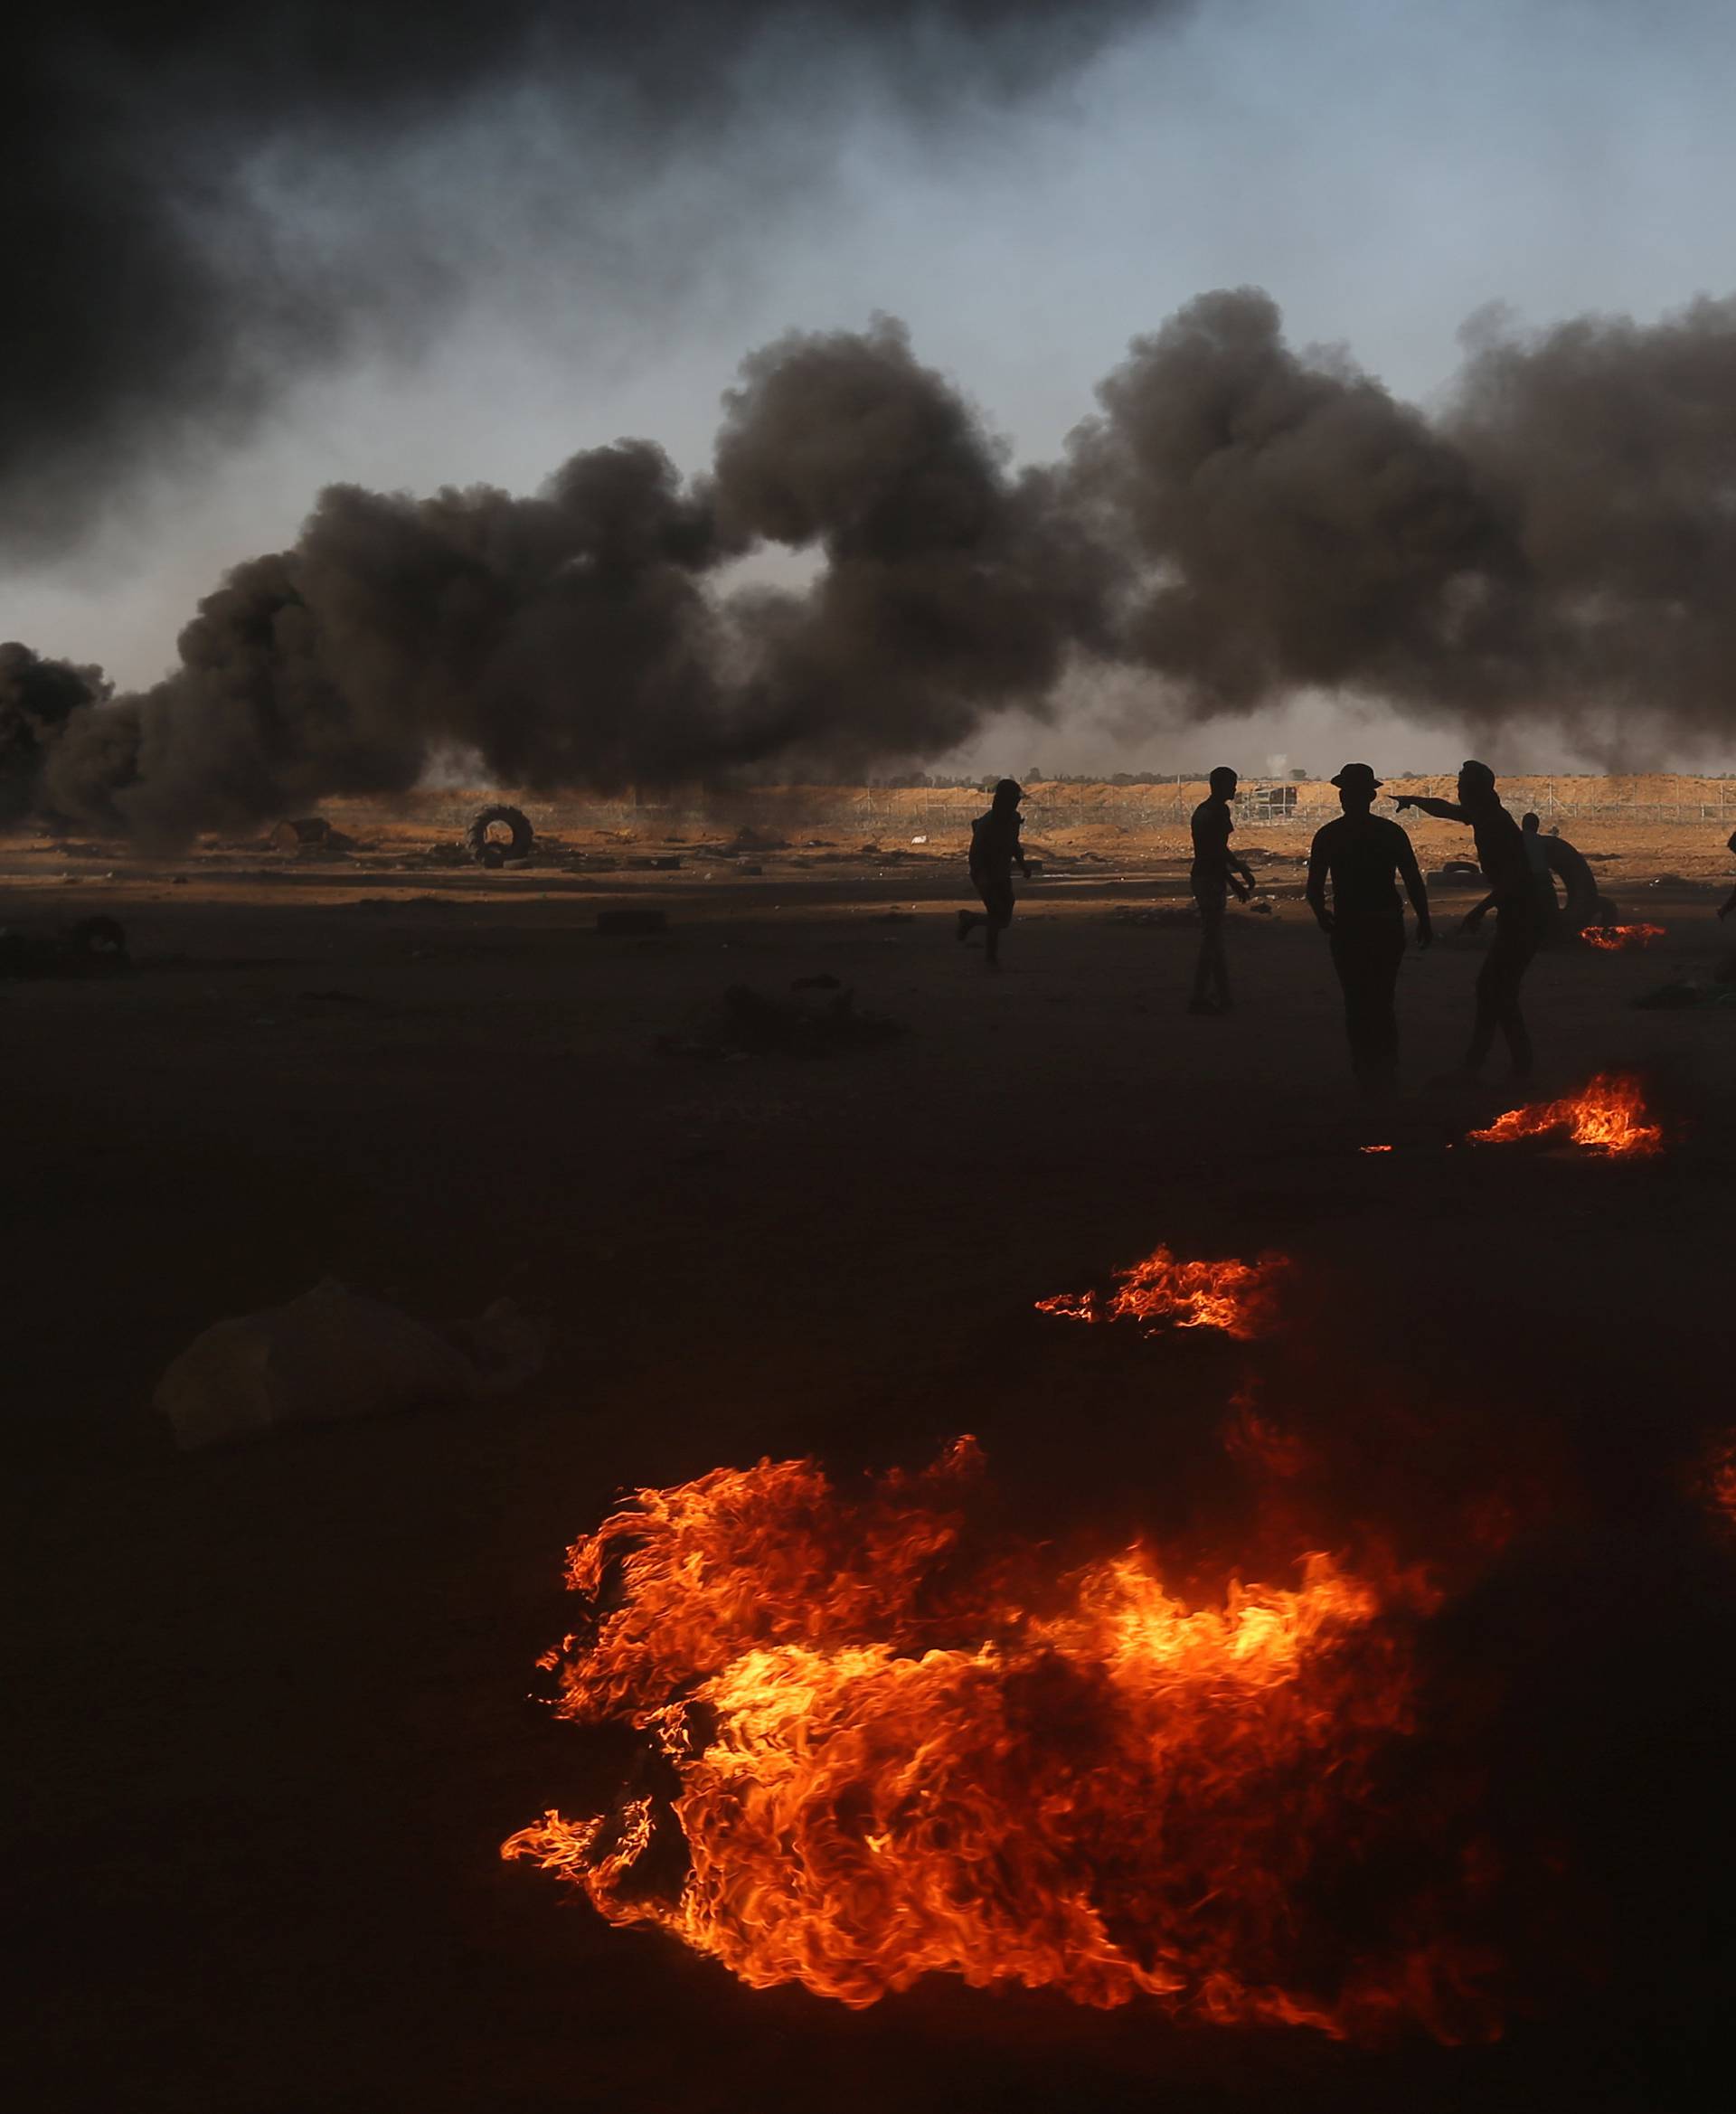 Palestinian demonstrators are seen as smoke rises from burning tires during a protest marking the 70th anniversary of Nakba, at the Israel-Gaza border in the southern Gaza Strip